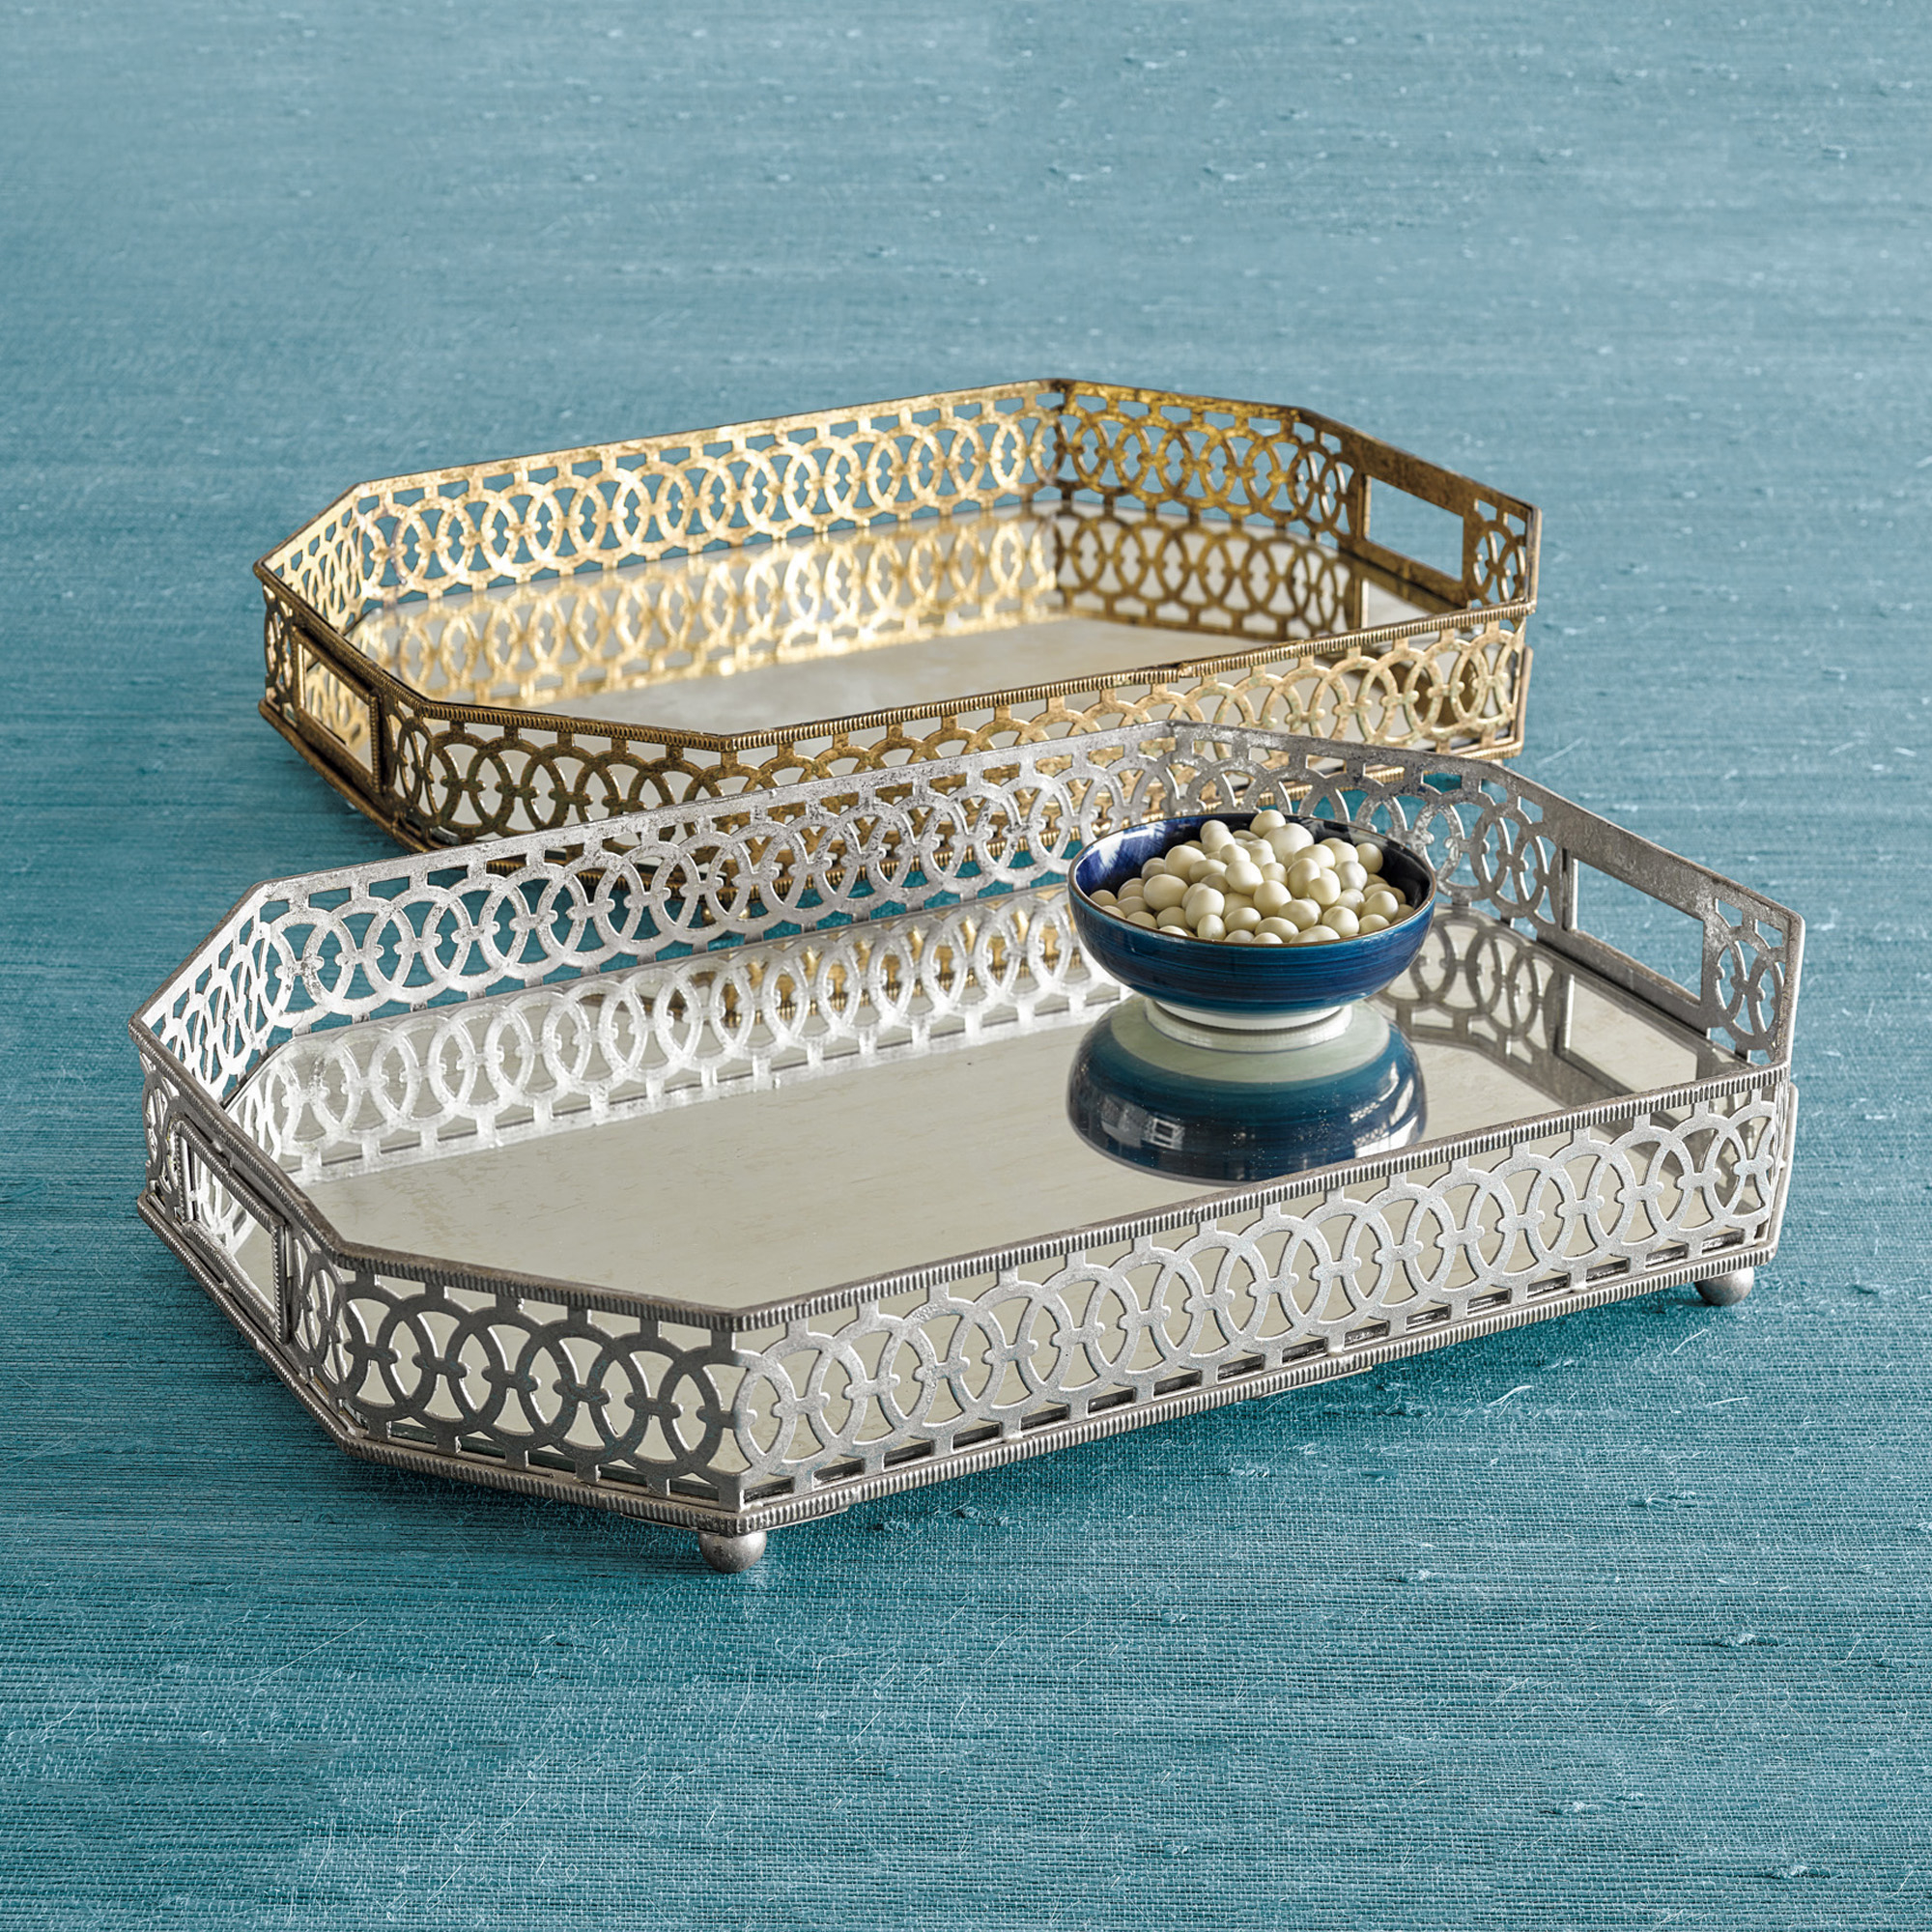 Antiqued Mirrored Trays | Gump's